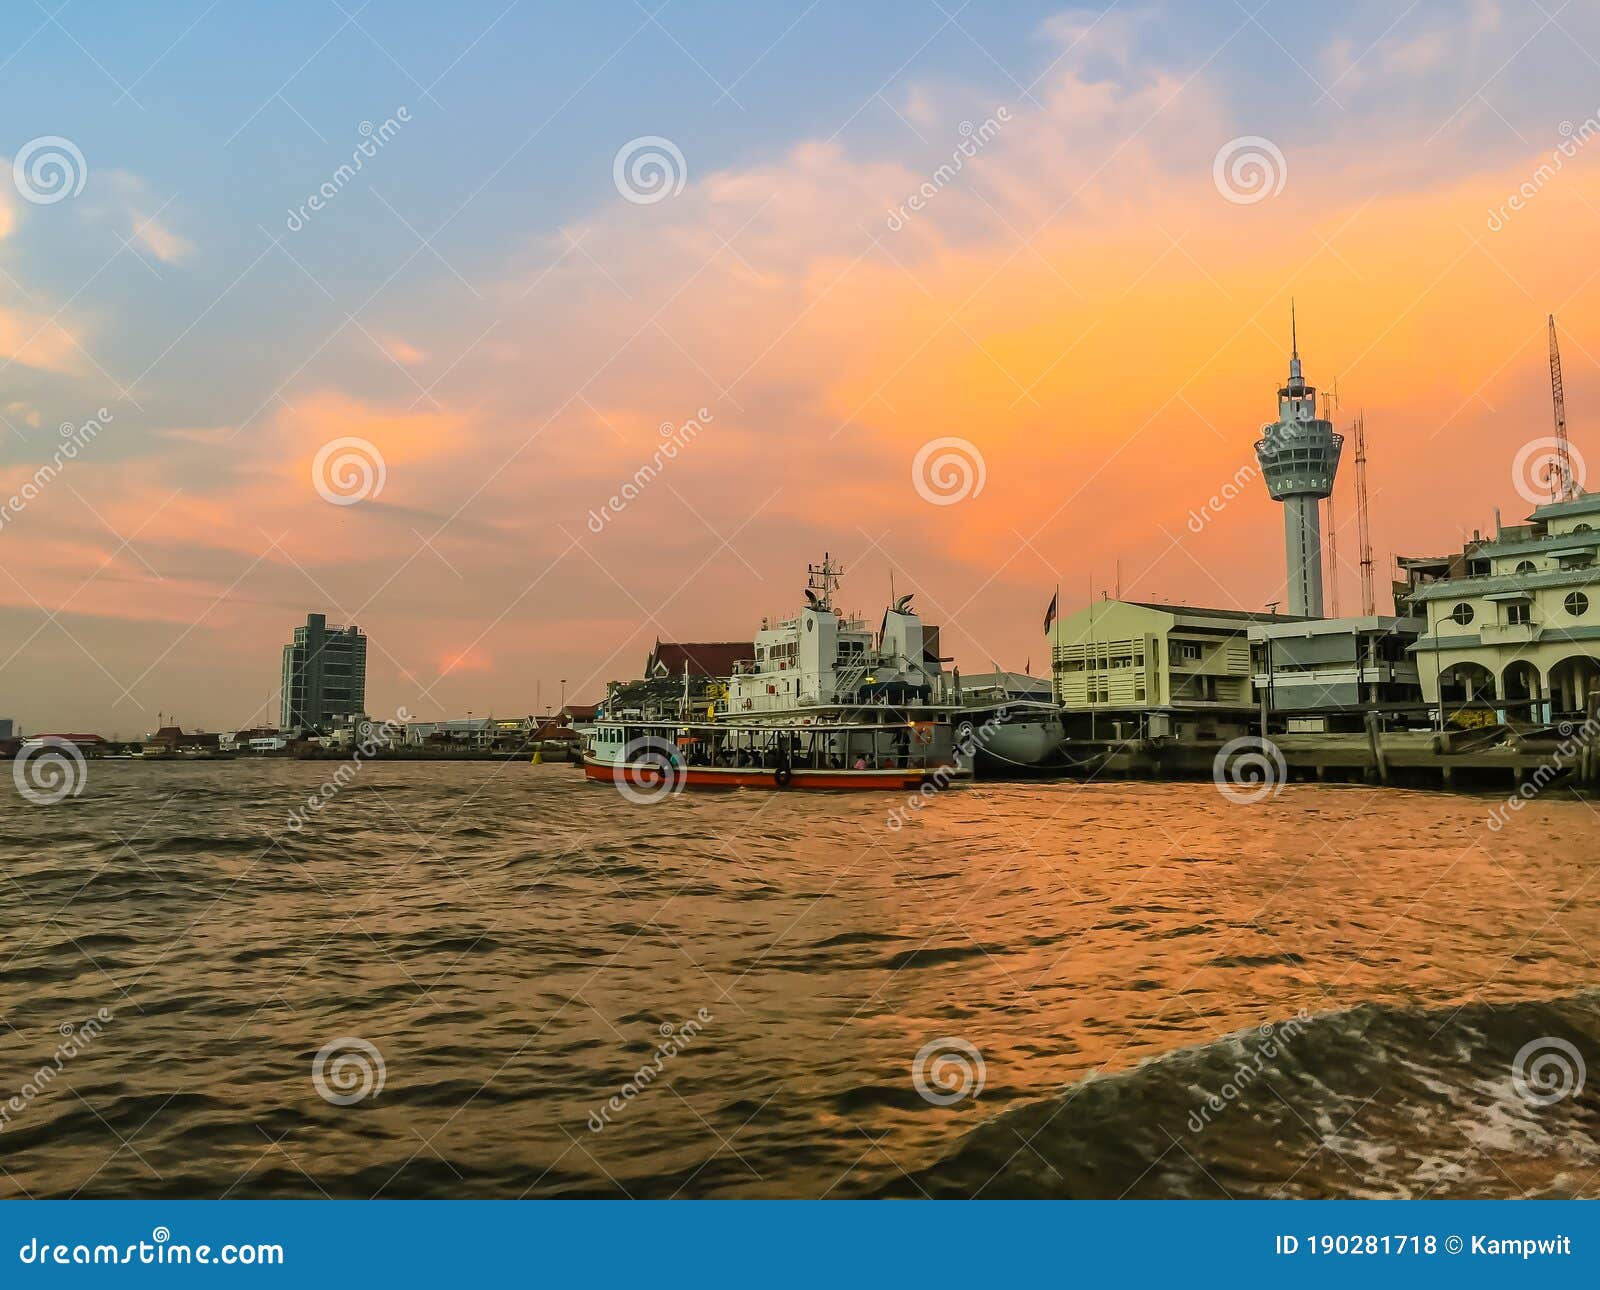 Riverfront View Of Samut Prakan City Hall With New Observation Tower And Boat Pier Samut Prakan Is At The Mouth Of The Chao Stock Photo Image Of Landscape Chao